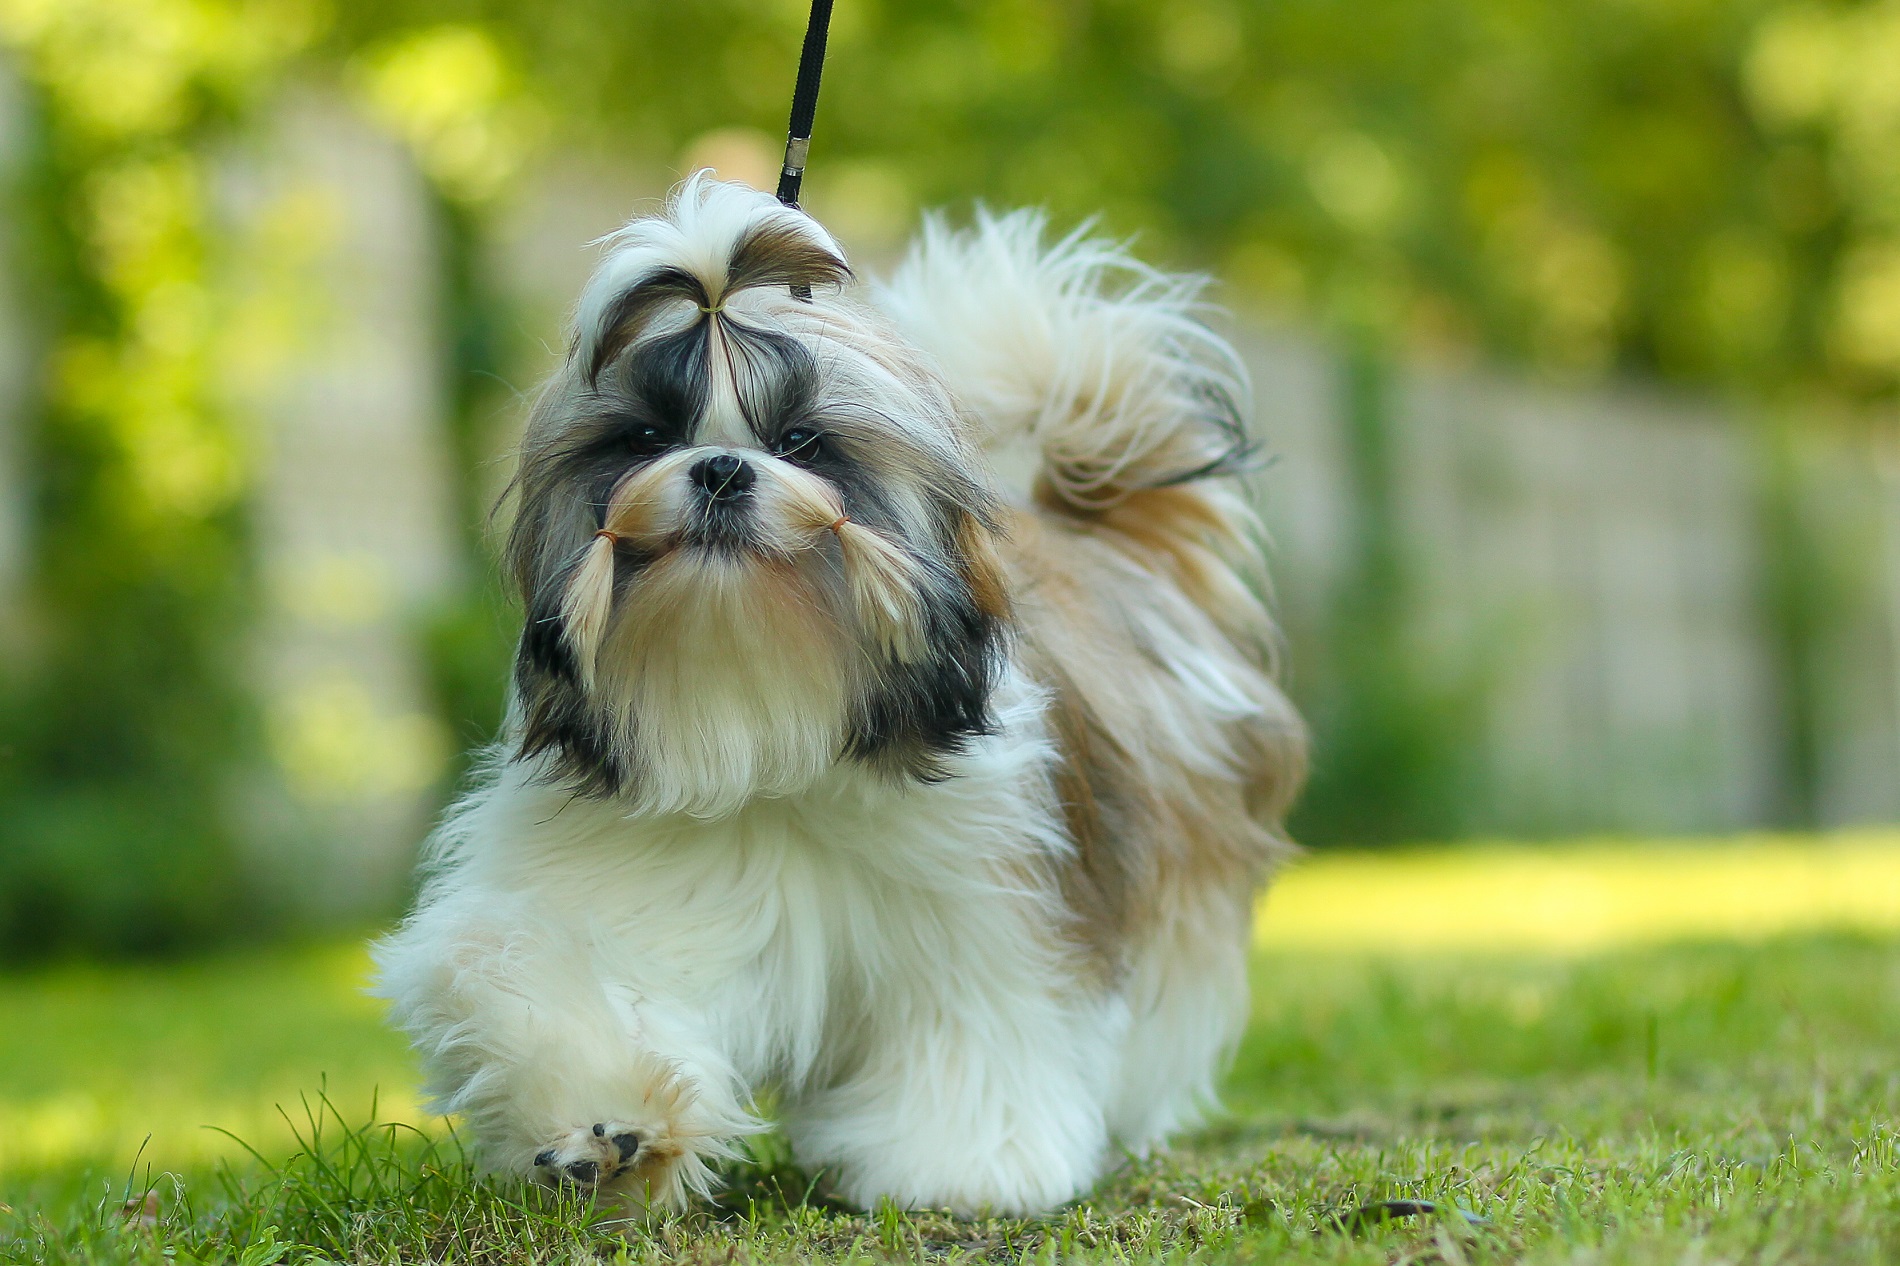 What Makes Shih Tzus Happy